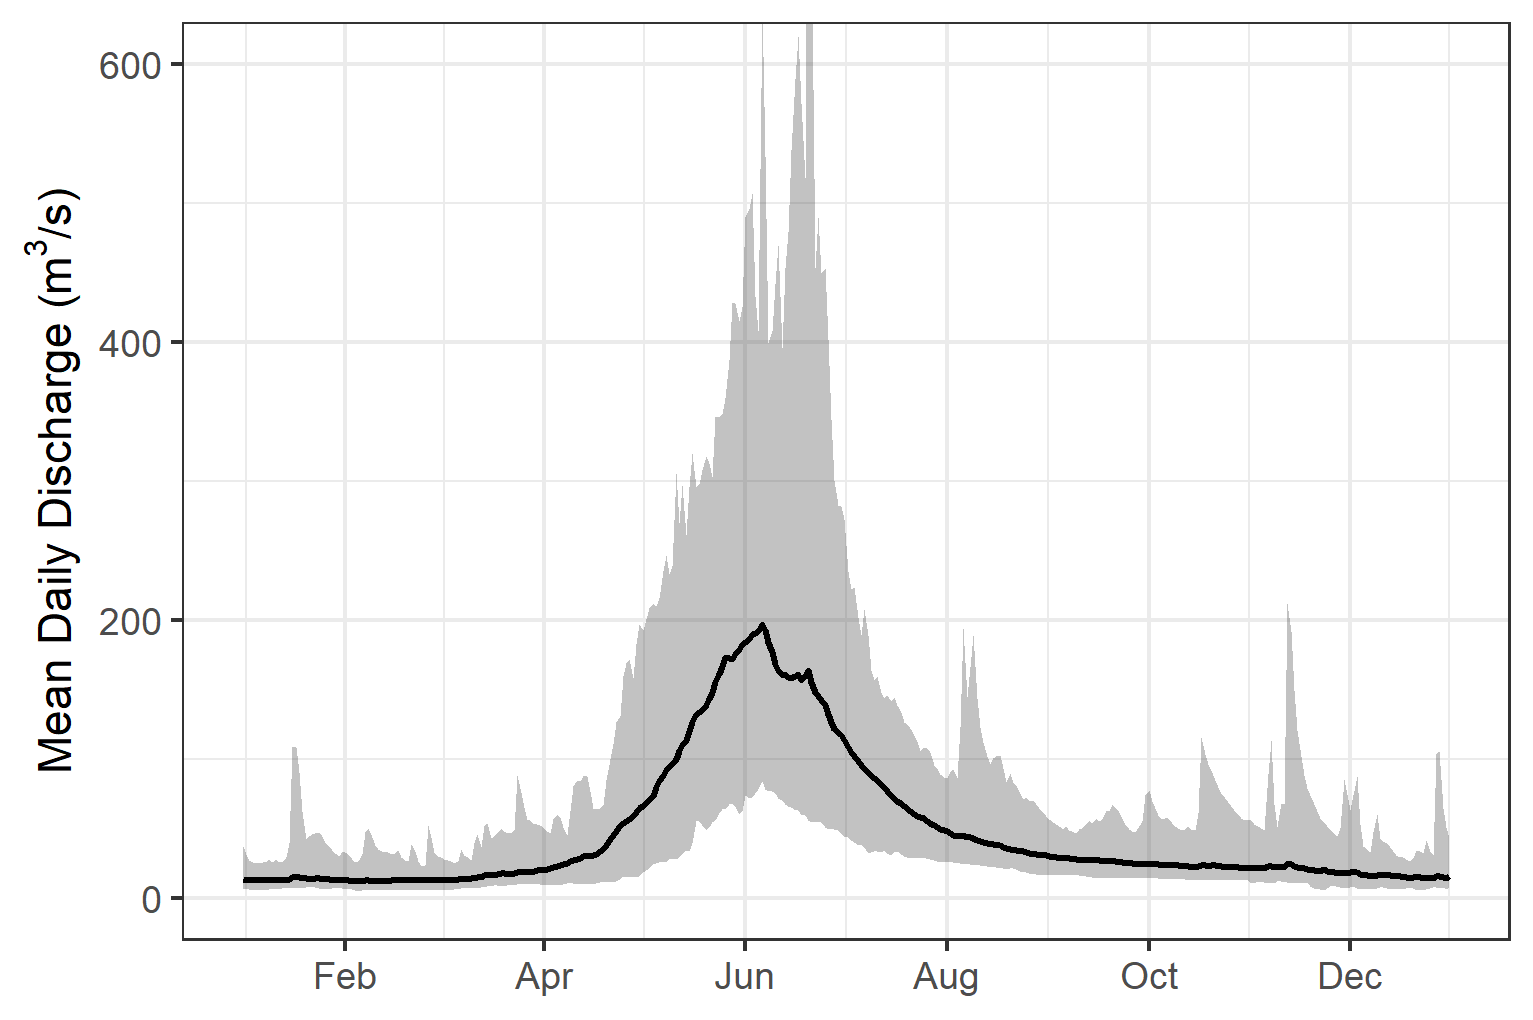 Hydrograph for Elk River at Fernie (Station #08NK002). Available daily discharge data from 1970 to 2018 with black line and shaded ribbon representing mean and maximum/minimum flows respectively.